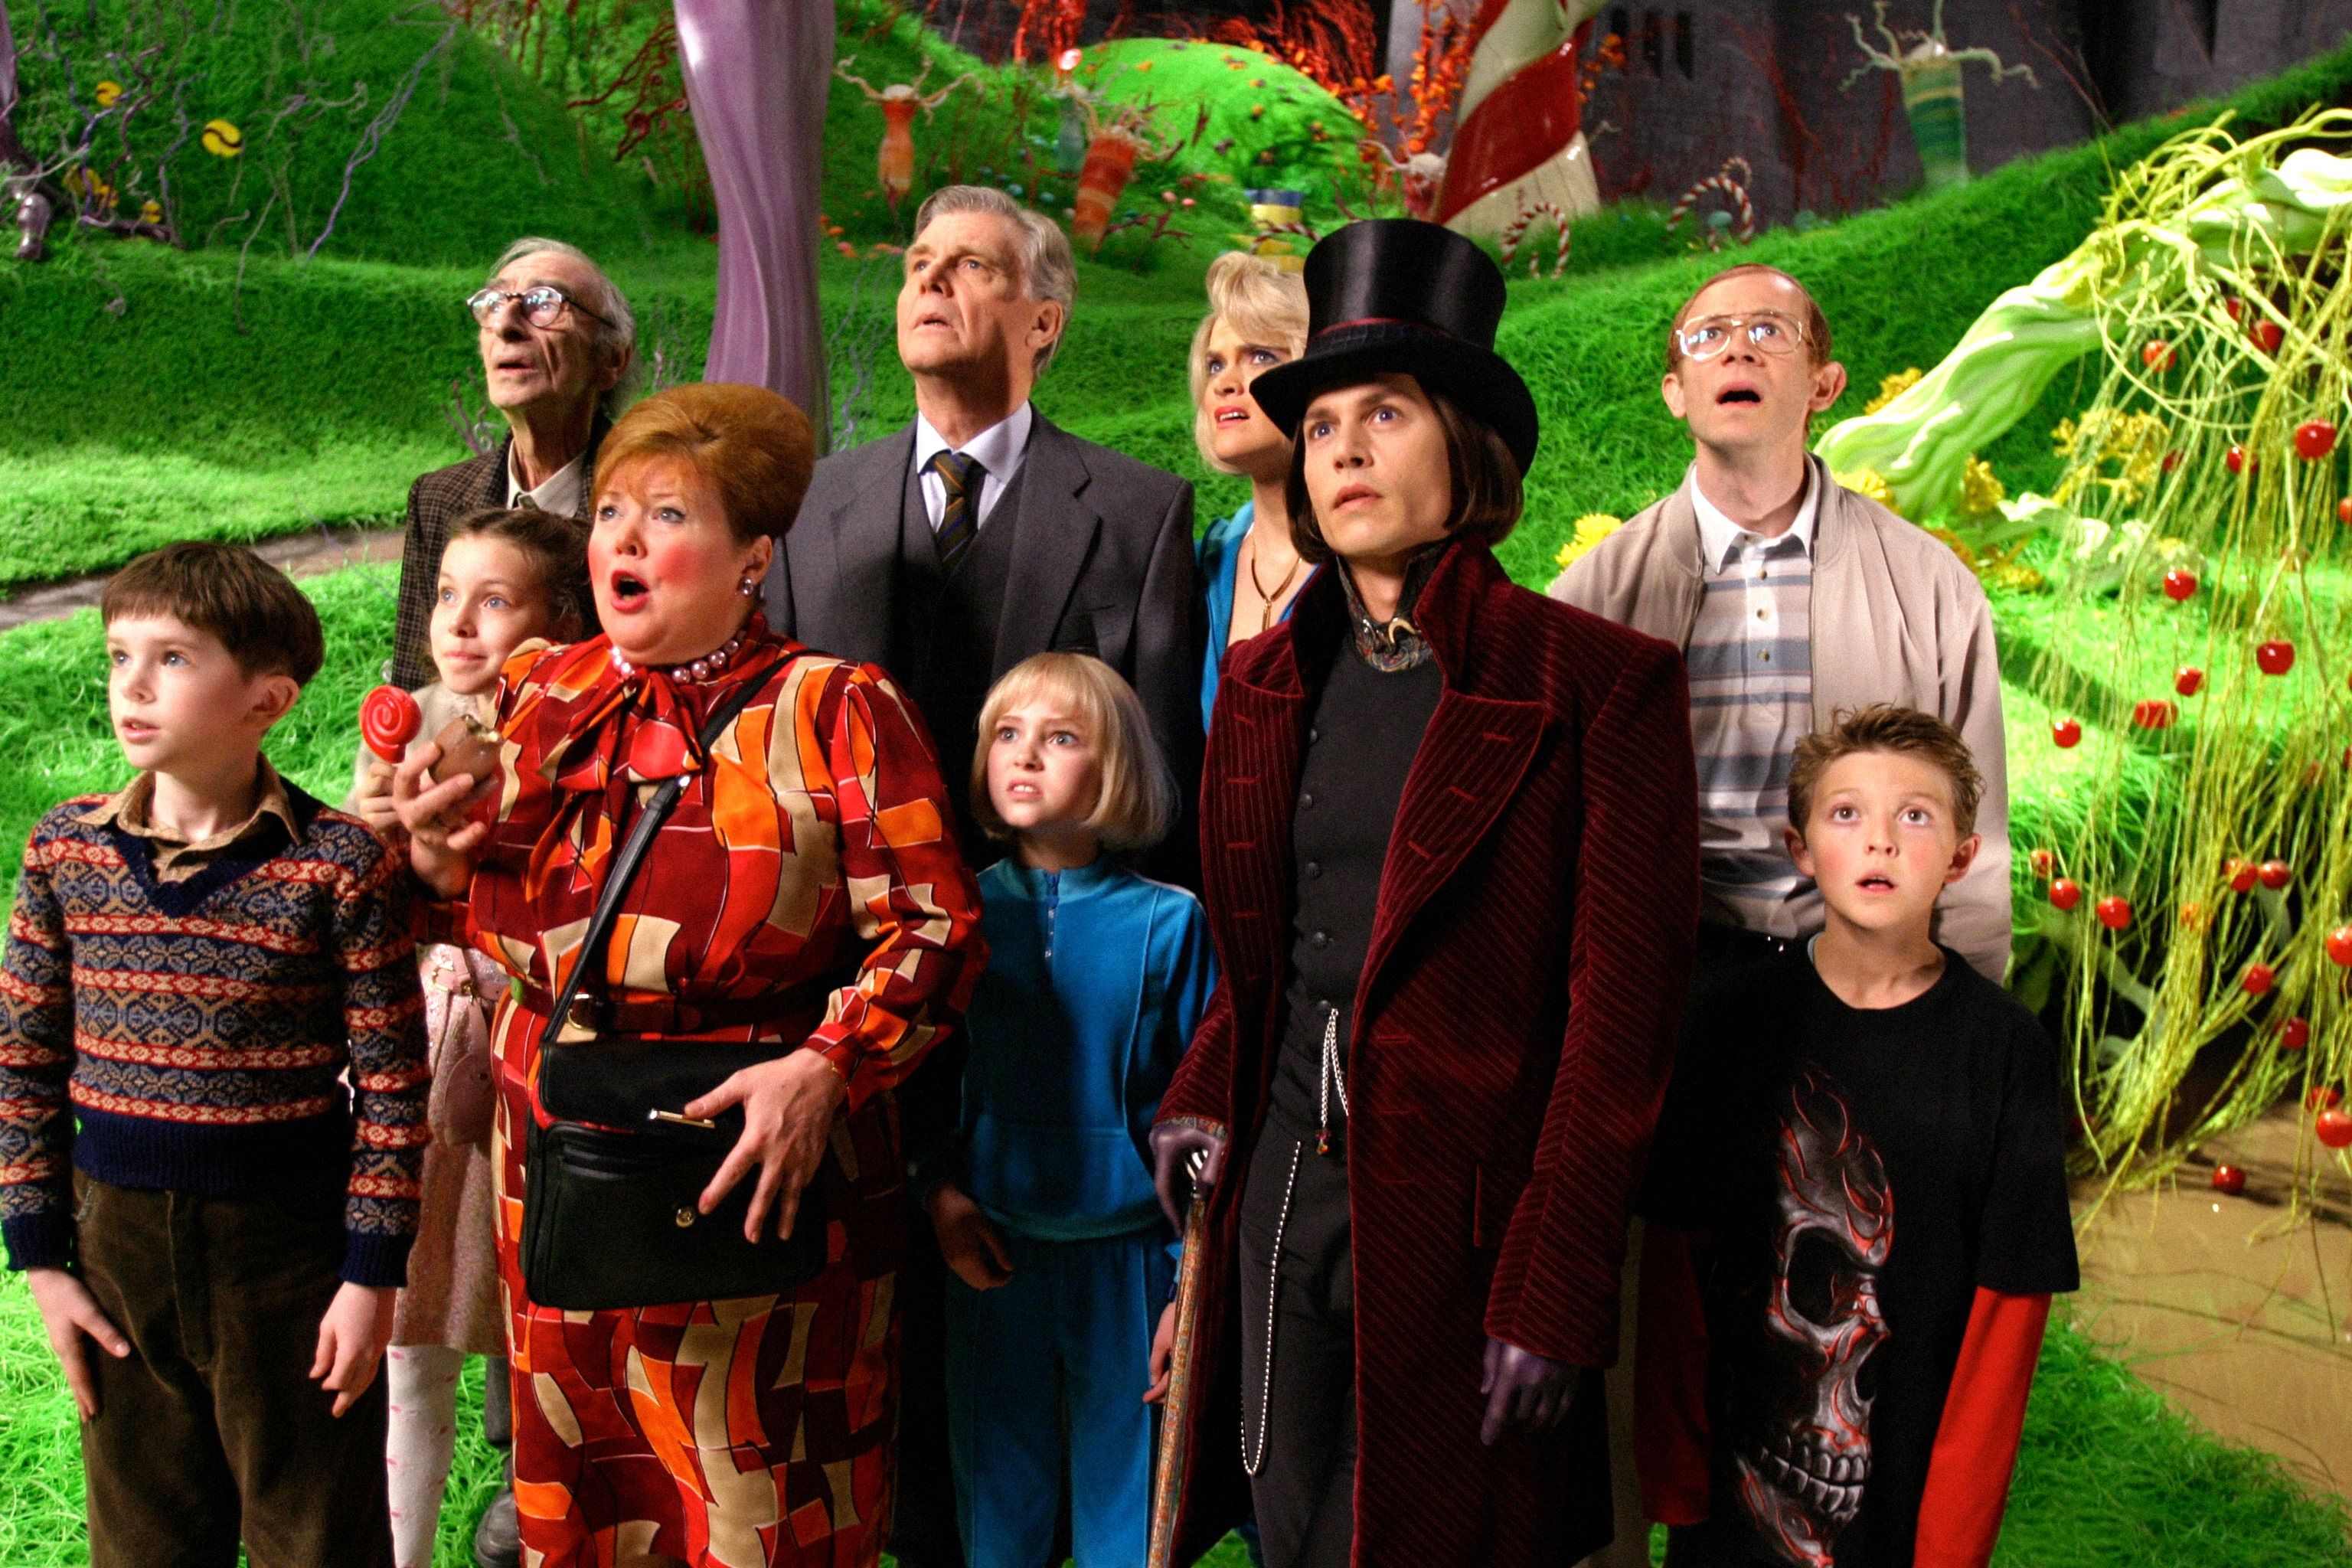 charlie-and-the-chocolate-factory-2-the-kids-of-tim-burton-s-charlie-and-the-chocolate-factory-have-all-grown-up-jpeg-247348.jpg